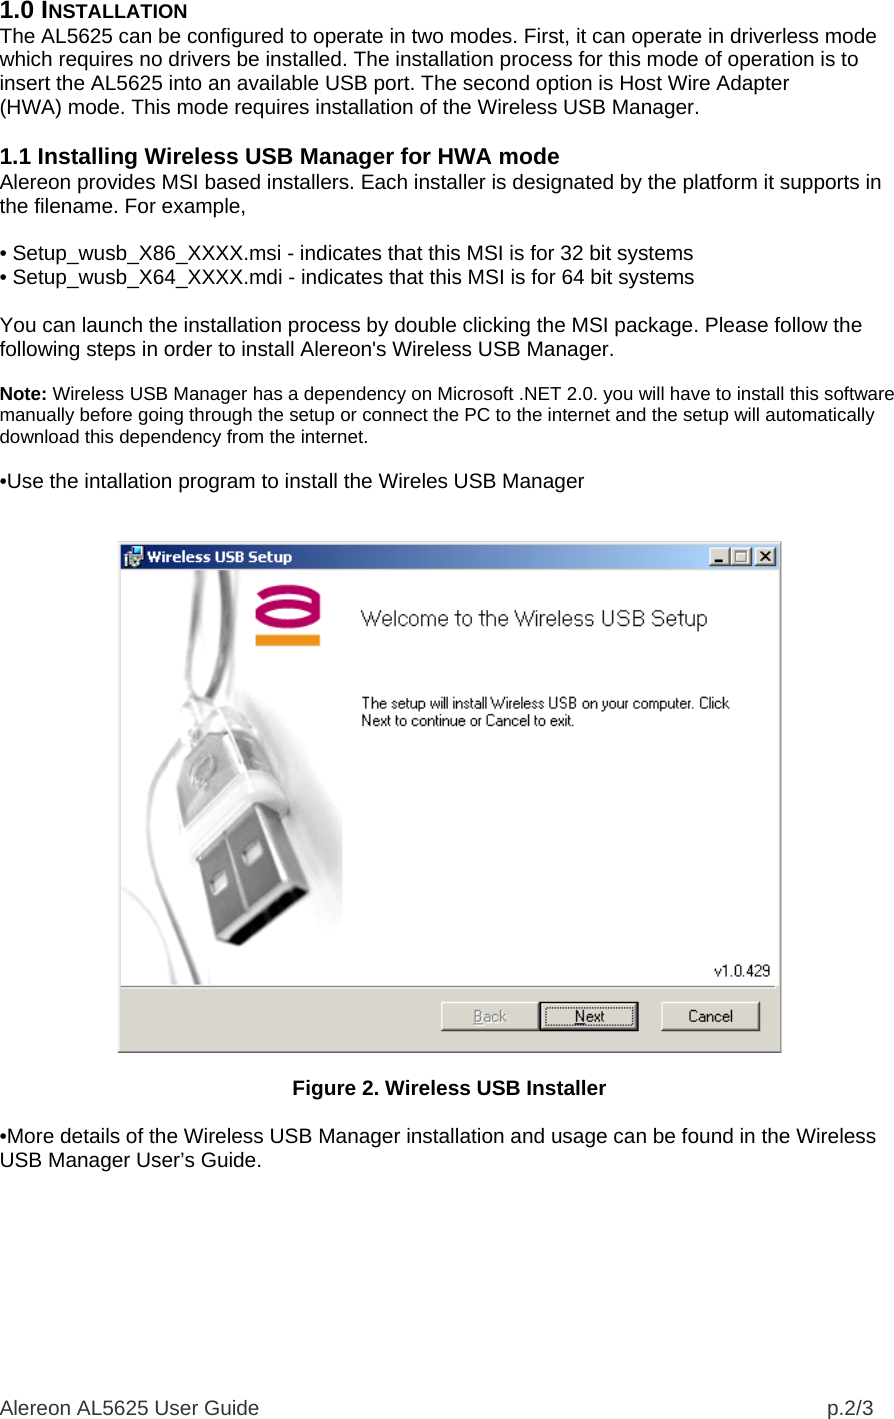 Alereon AL5625 User Guide                                                                                                  p.2/3 1.0 INSTALLATION The AL5625 can be configured to operate in two modes. First, it can operate in driverless mode which requires no drivers be installed. The installation process for this mode of operation is to insert the AL5625 into an available USB port. The second option is Host Wire Adapter (HWA) mode. This mode requires installation of the Wireless USB Manager.  1.1 Installing Wireless USB Manager for HWA mode Alereon provides MSI based installers. Each installer is designated by the platform it supports in the filename. For example,  • Setup_wusb_X86_XXXX.msi - indicates that this MSI is for 32 bit systems • Setup_wusb_X64_XXXX.mdi - indicates that this MSI is for 64 bit systems  You can launch the installation process by double clicking the MSI package. Please follow the following steps in order to install Alereon&apos;s Wireless USB Manager.  Note: Wireless USB Manager has a dependency on Microsoft .NET 2.0. you will have to install this software manually before going through the setup or connect the PC to the internet and the setup will automatically download this dependency from the internet.  •Use the intallation program to install the Wireles USB Manager     Figure 2. Wireless USB Installer  •More details of the Wireless USB Manager installation and usage can be found in the Wireless USB Manager User’s Guide.  